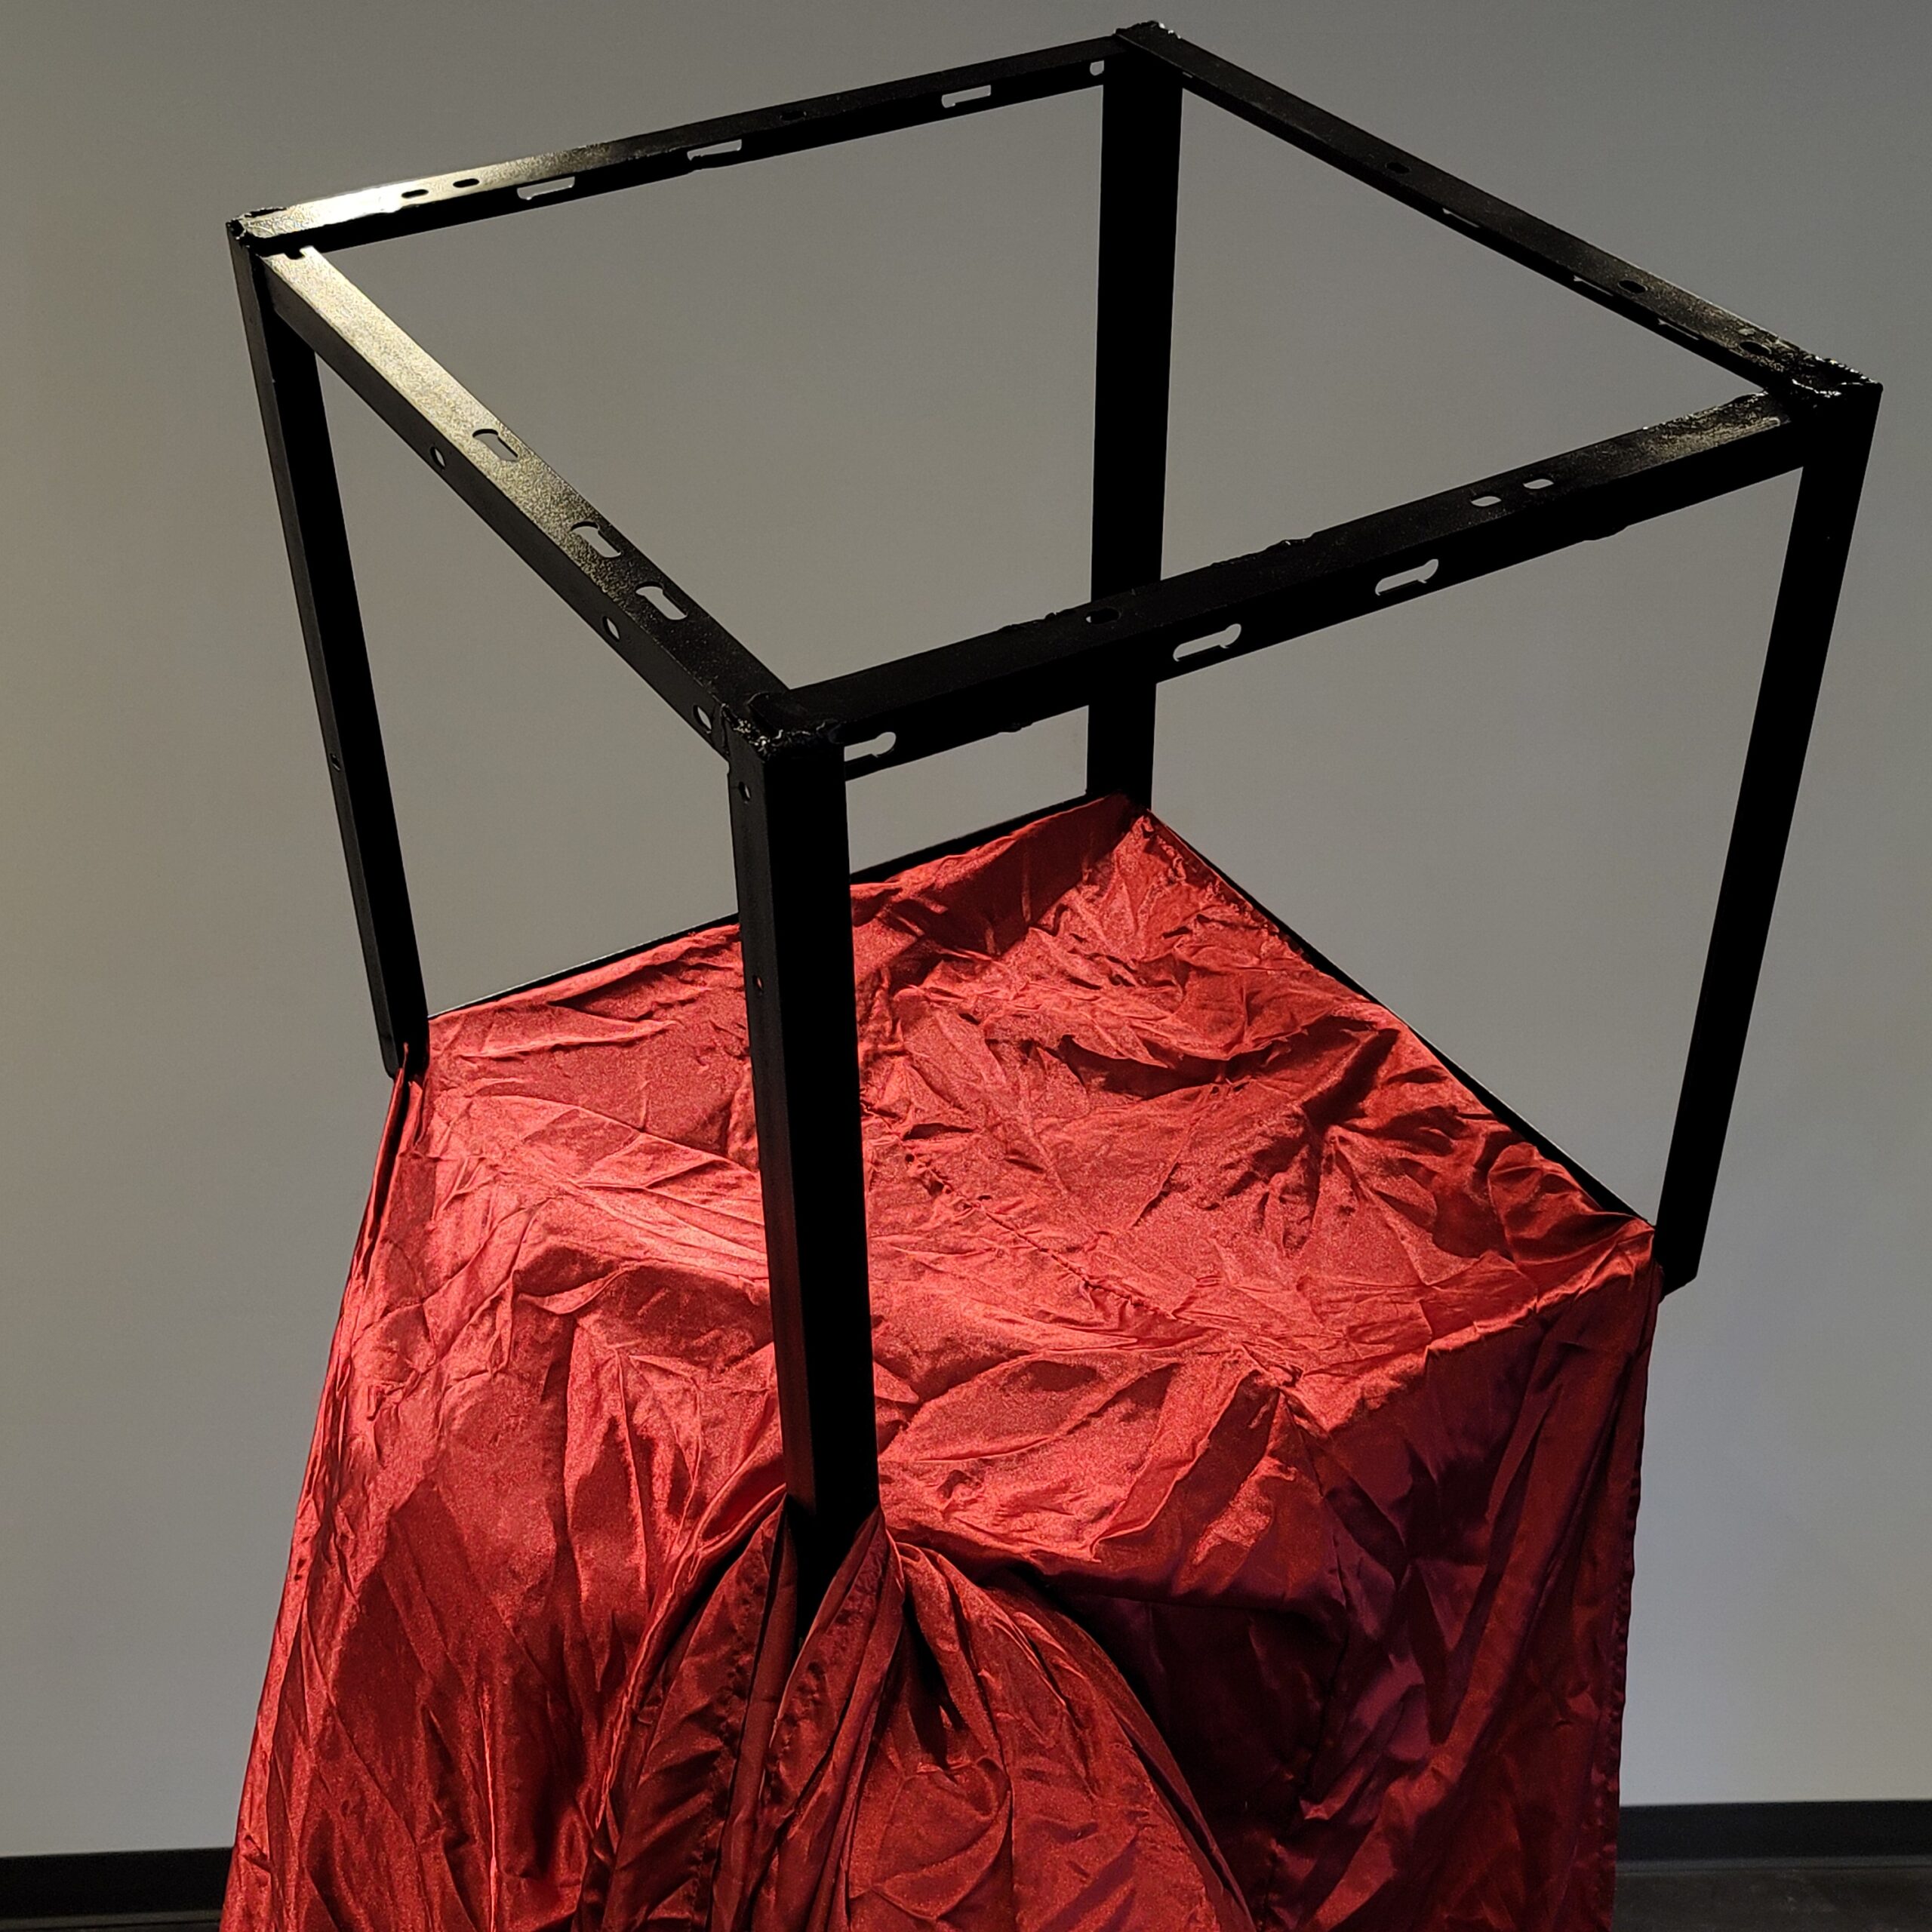 Cube metal form with satin bed sheet